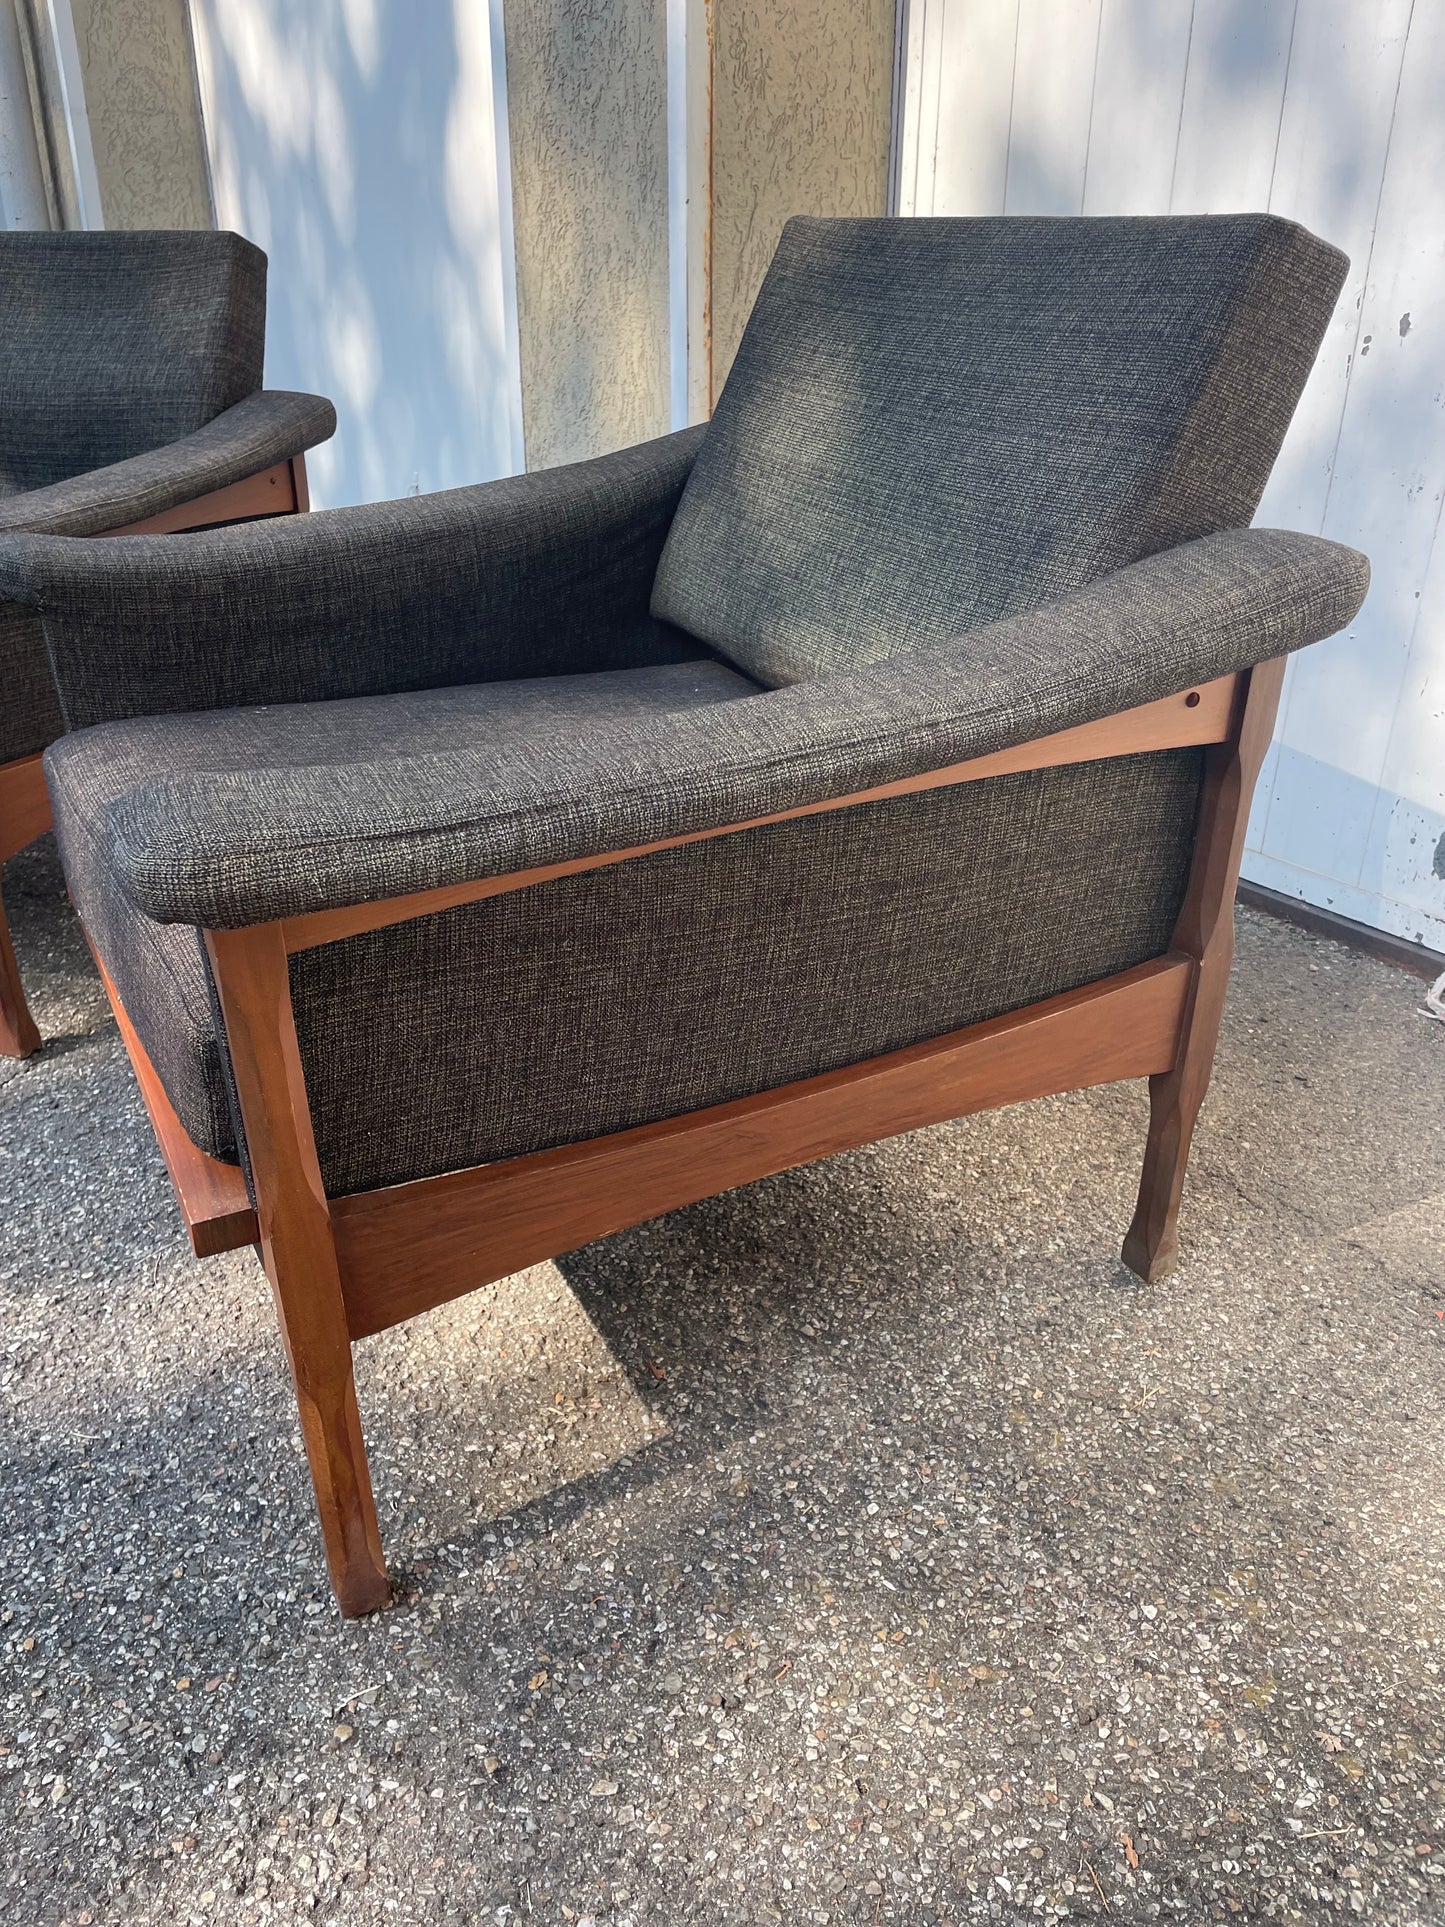 Pair of Minotti Renzo armchairs from the 70s design